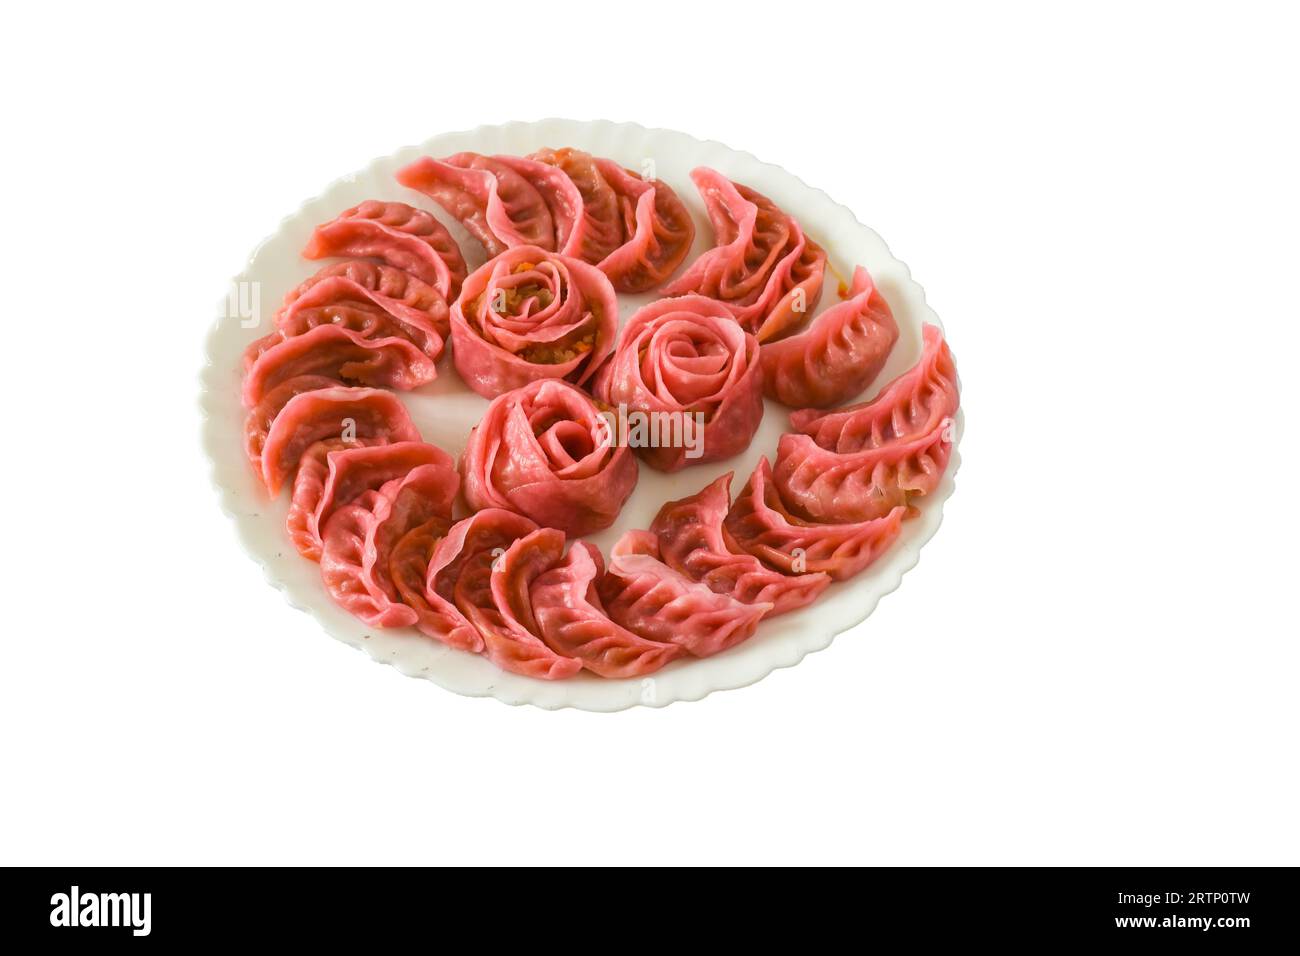 Momo is a popular Tibetan and Nepali dumpling, beloved for its exquisite taste and cultural significance. Stock Photo